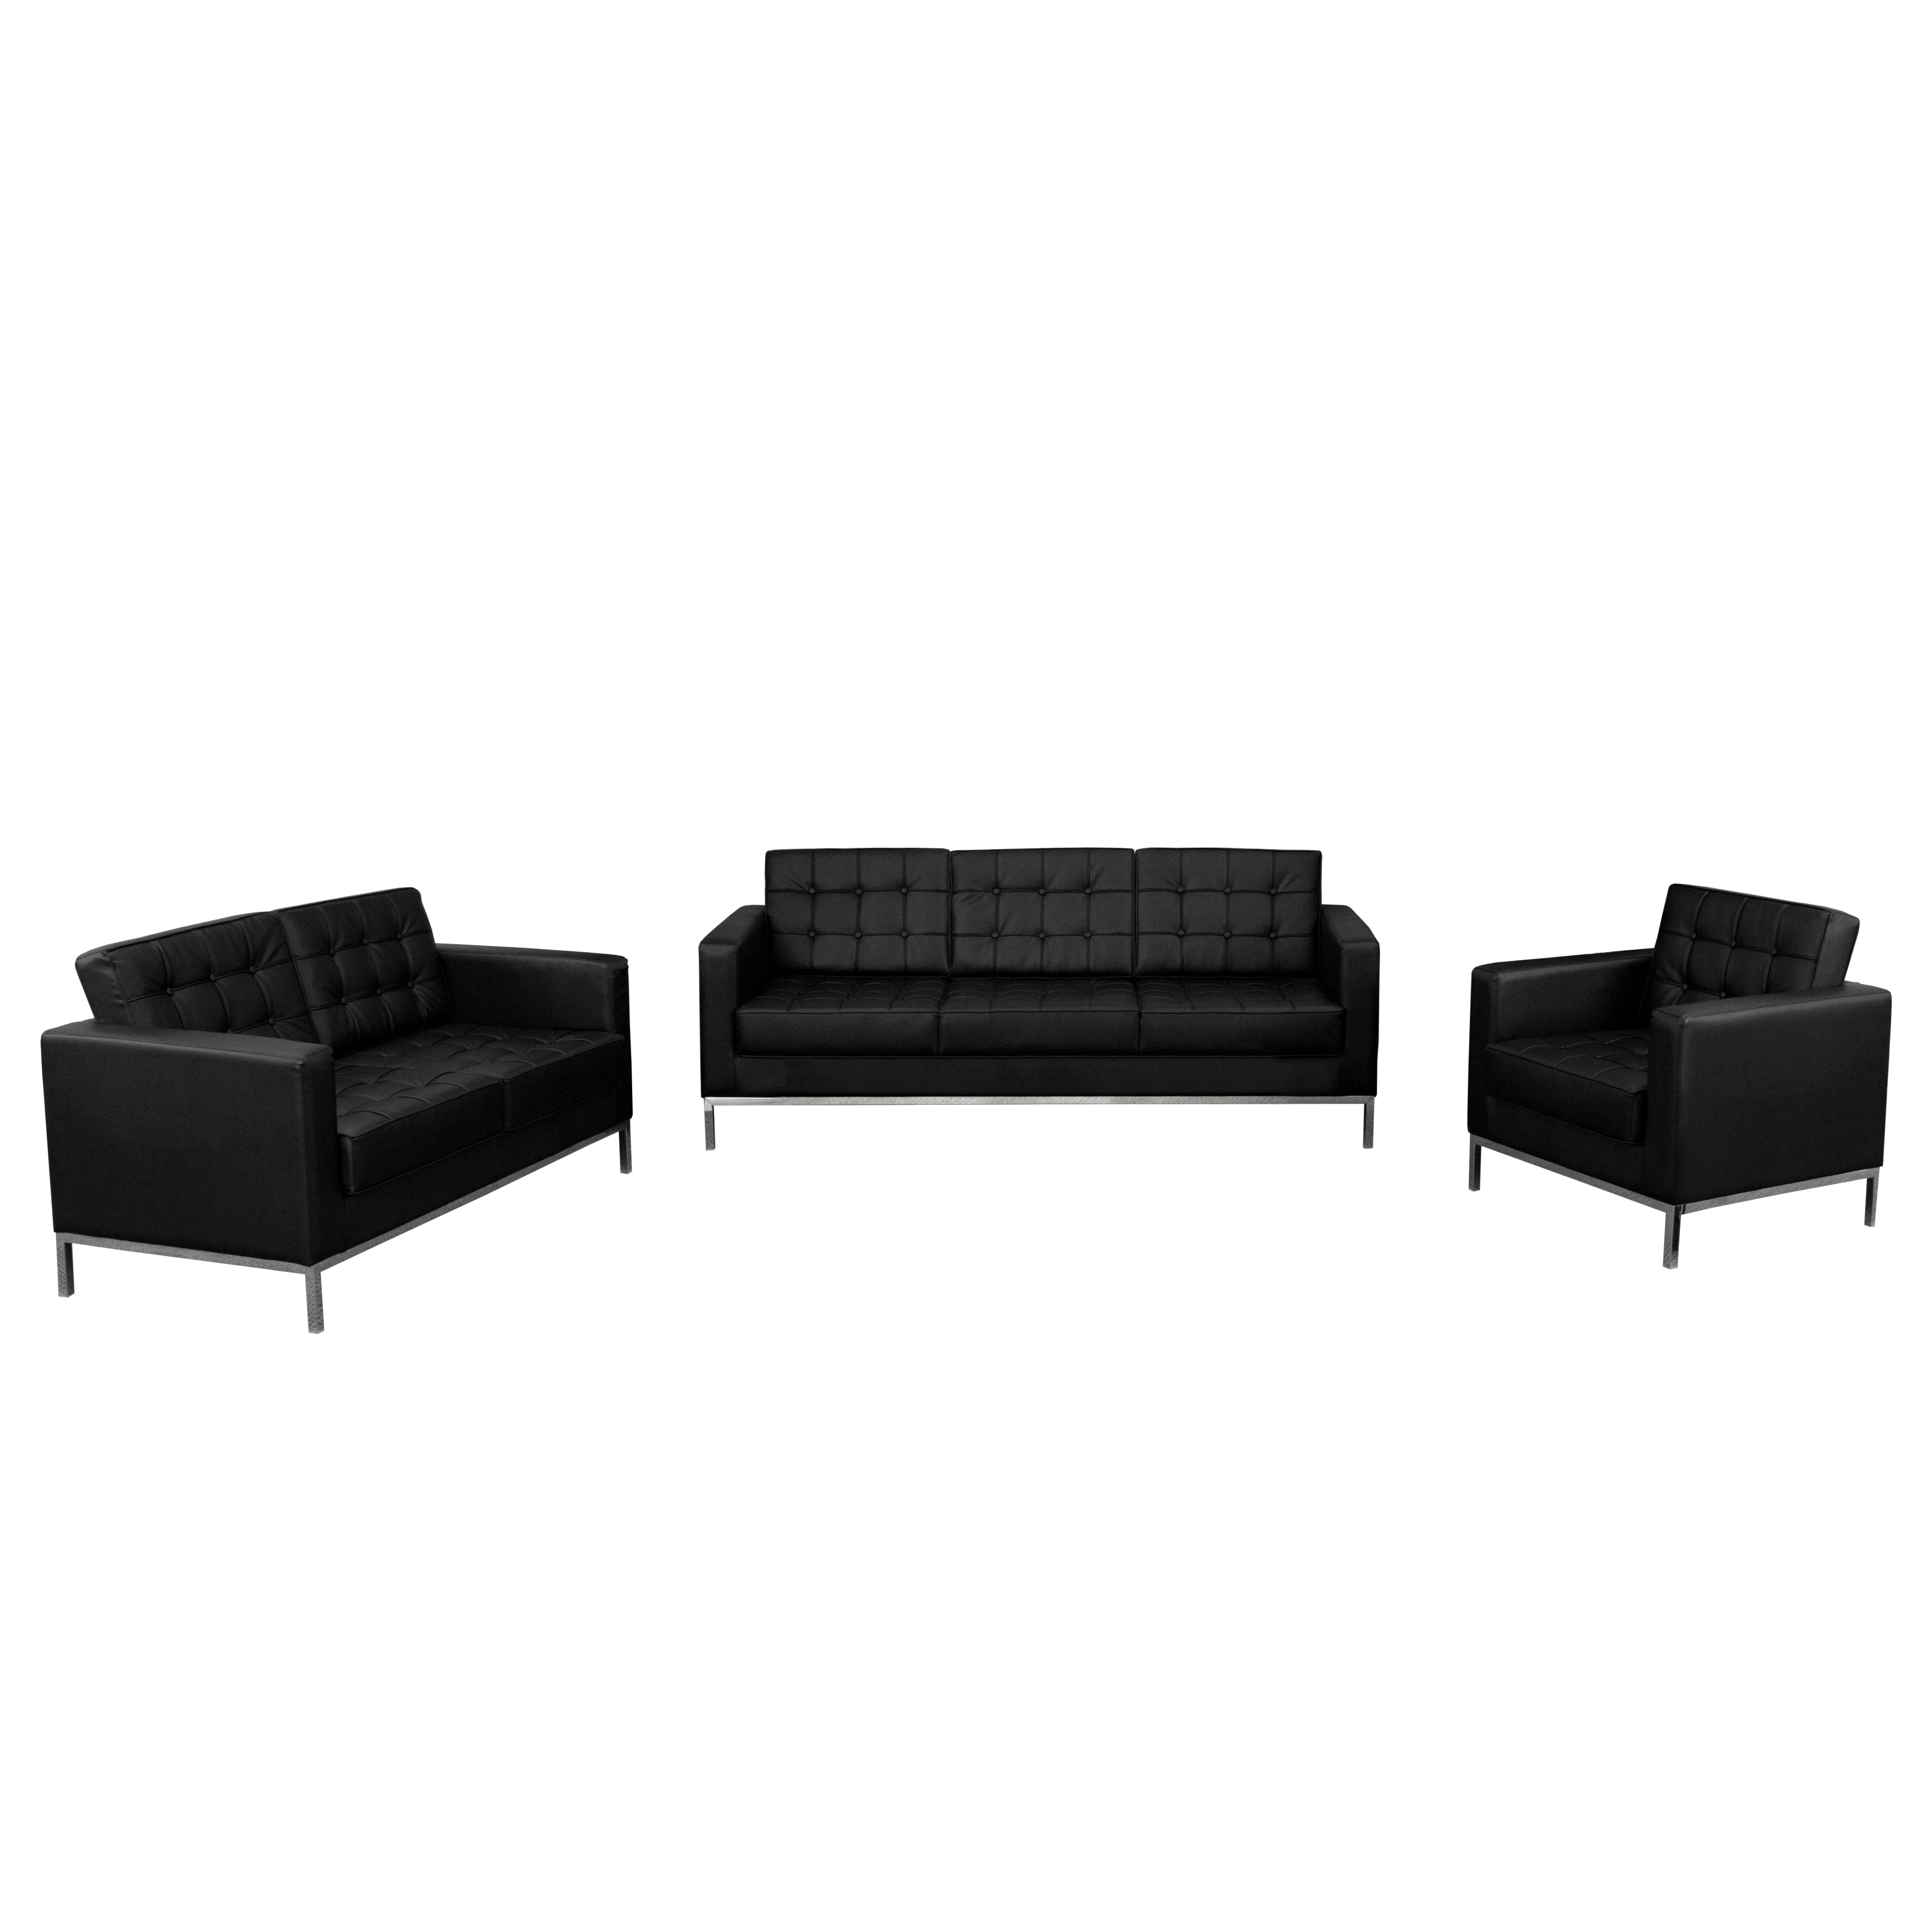 HERCULES Lacey Series Button Tufted LeatherSoft Reception Set with Integrated Stainless Steel Frame-Reception Set-Flash Furniture-Wall2Wall Furnishings